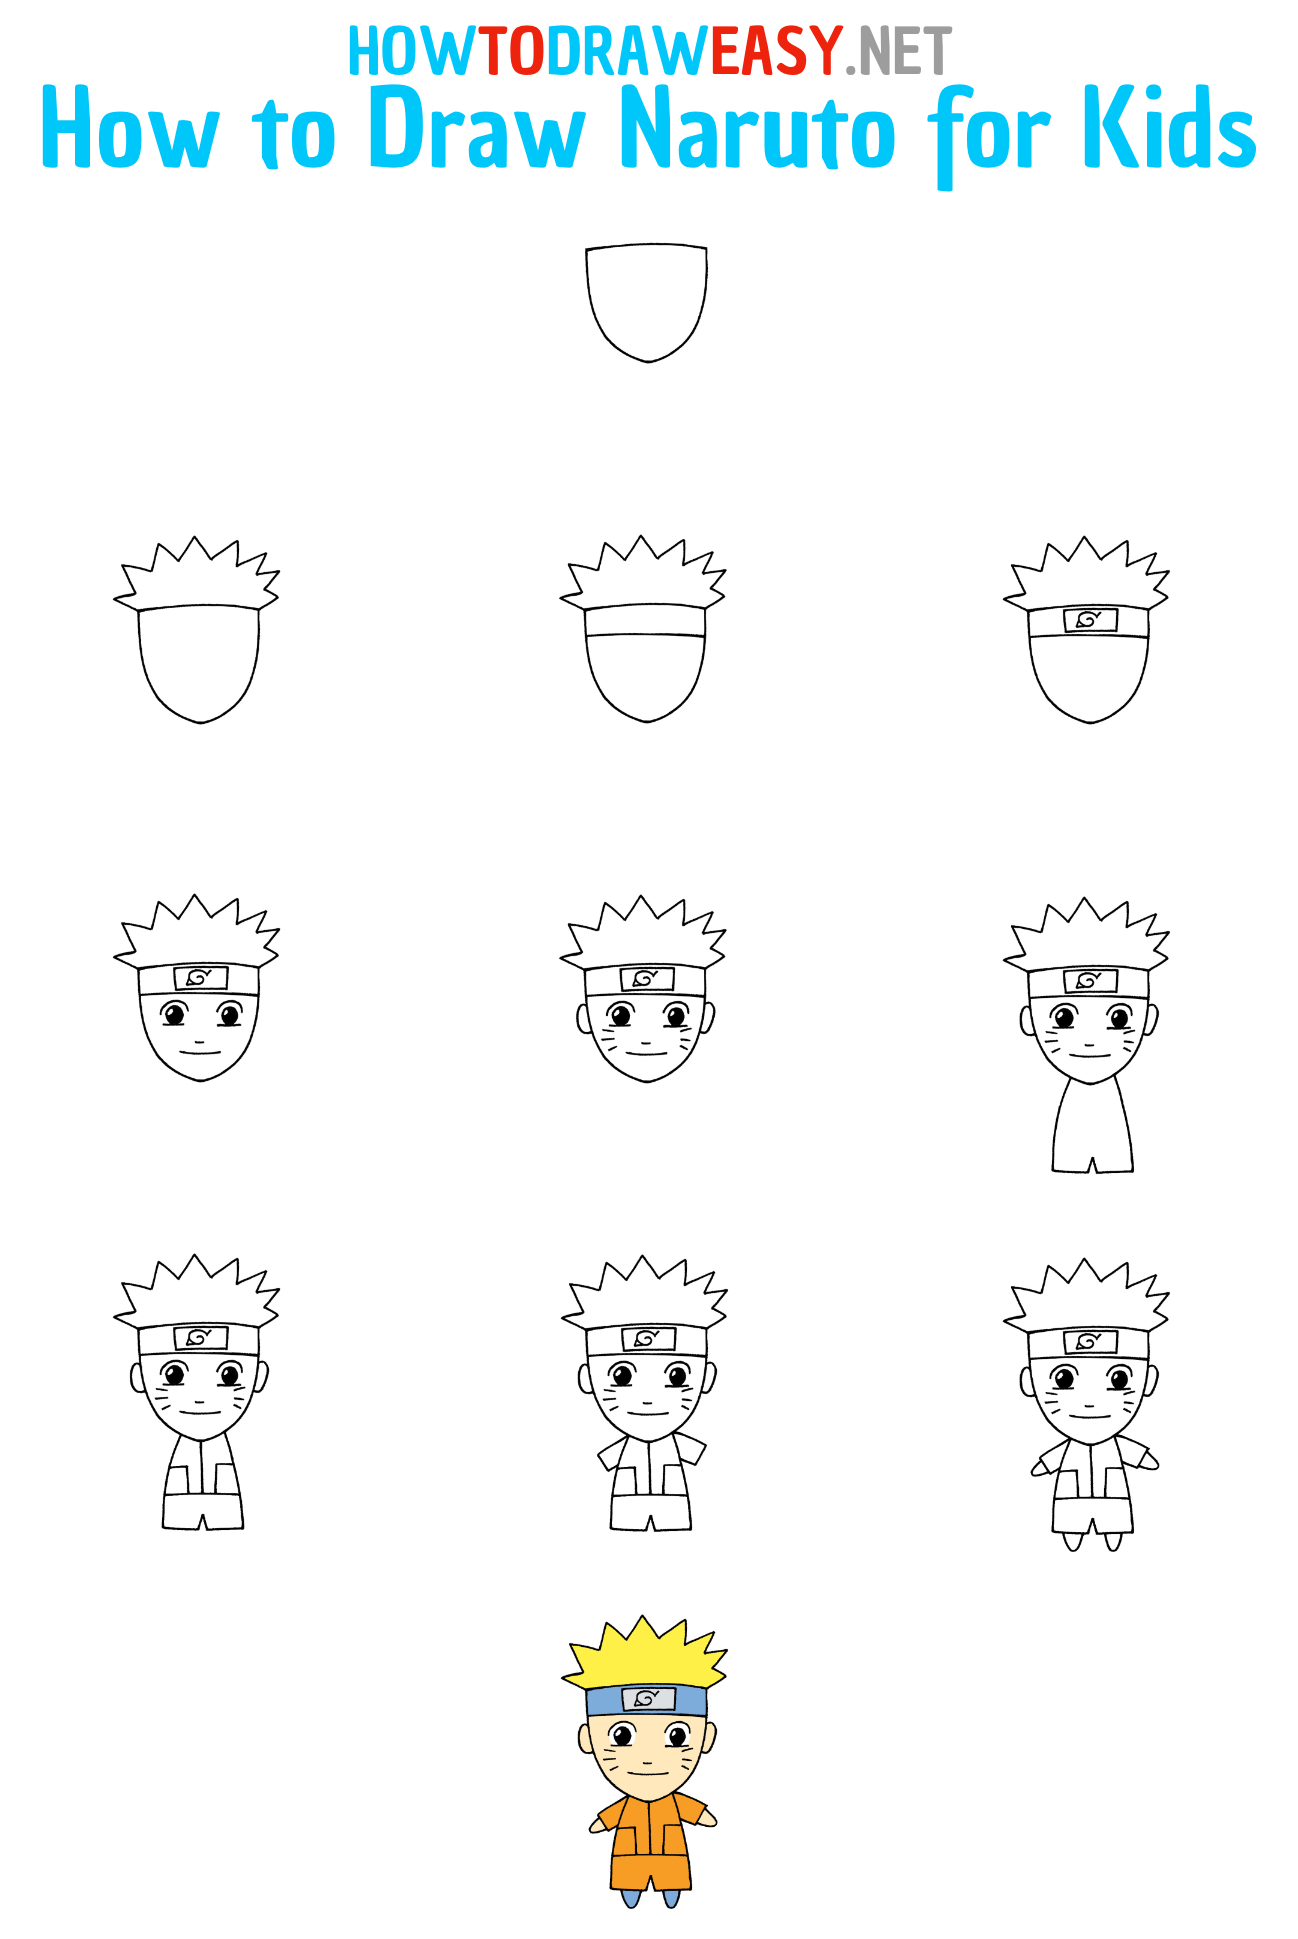 How to Draw Naruto Step by Step